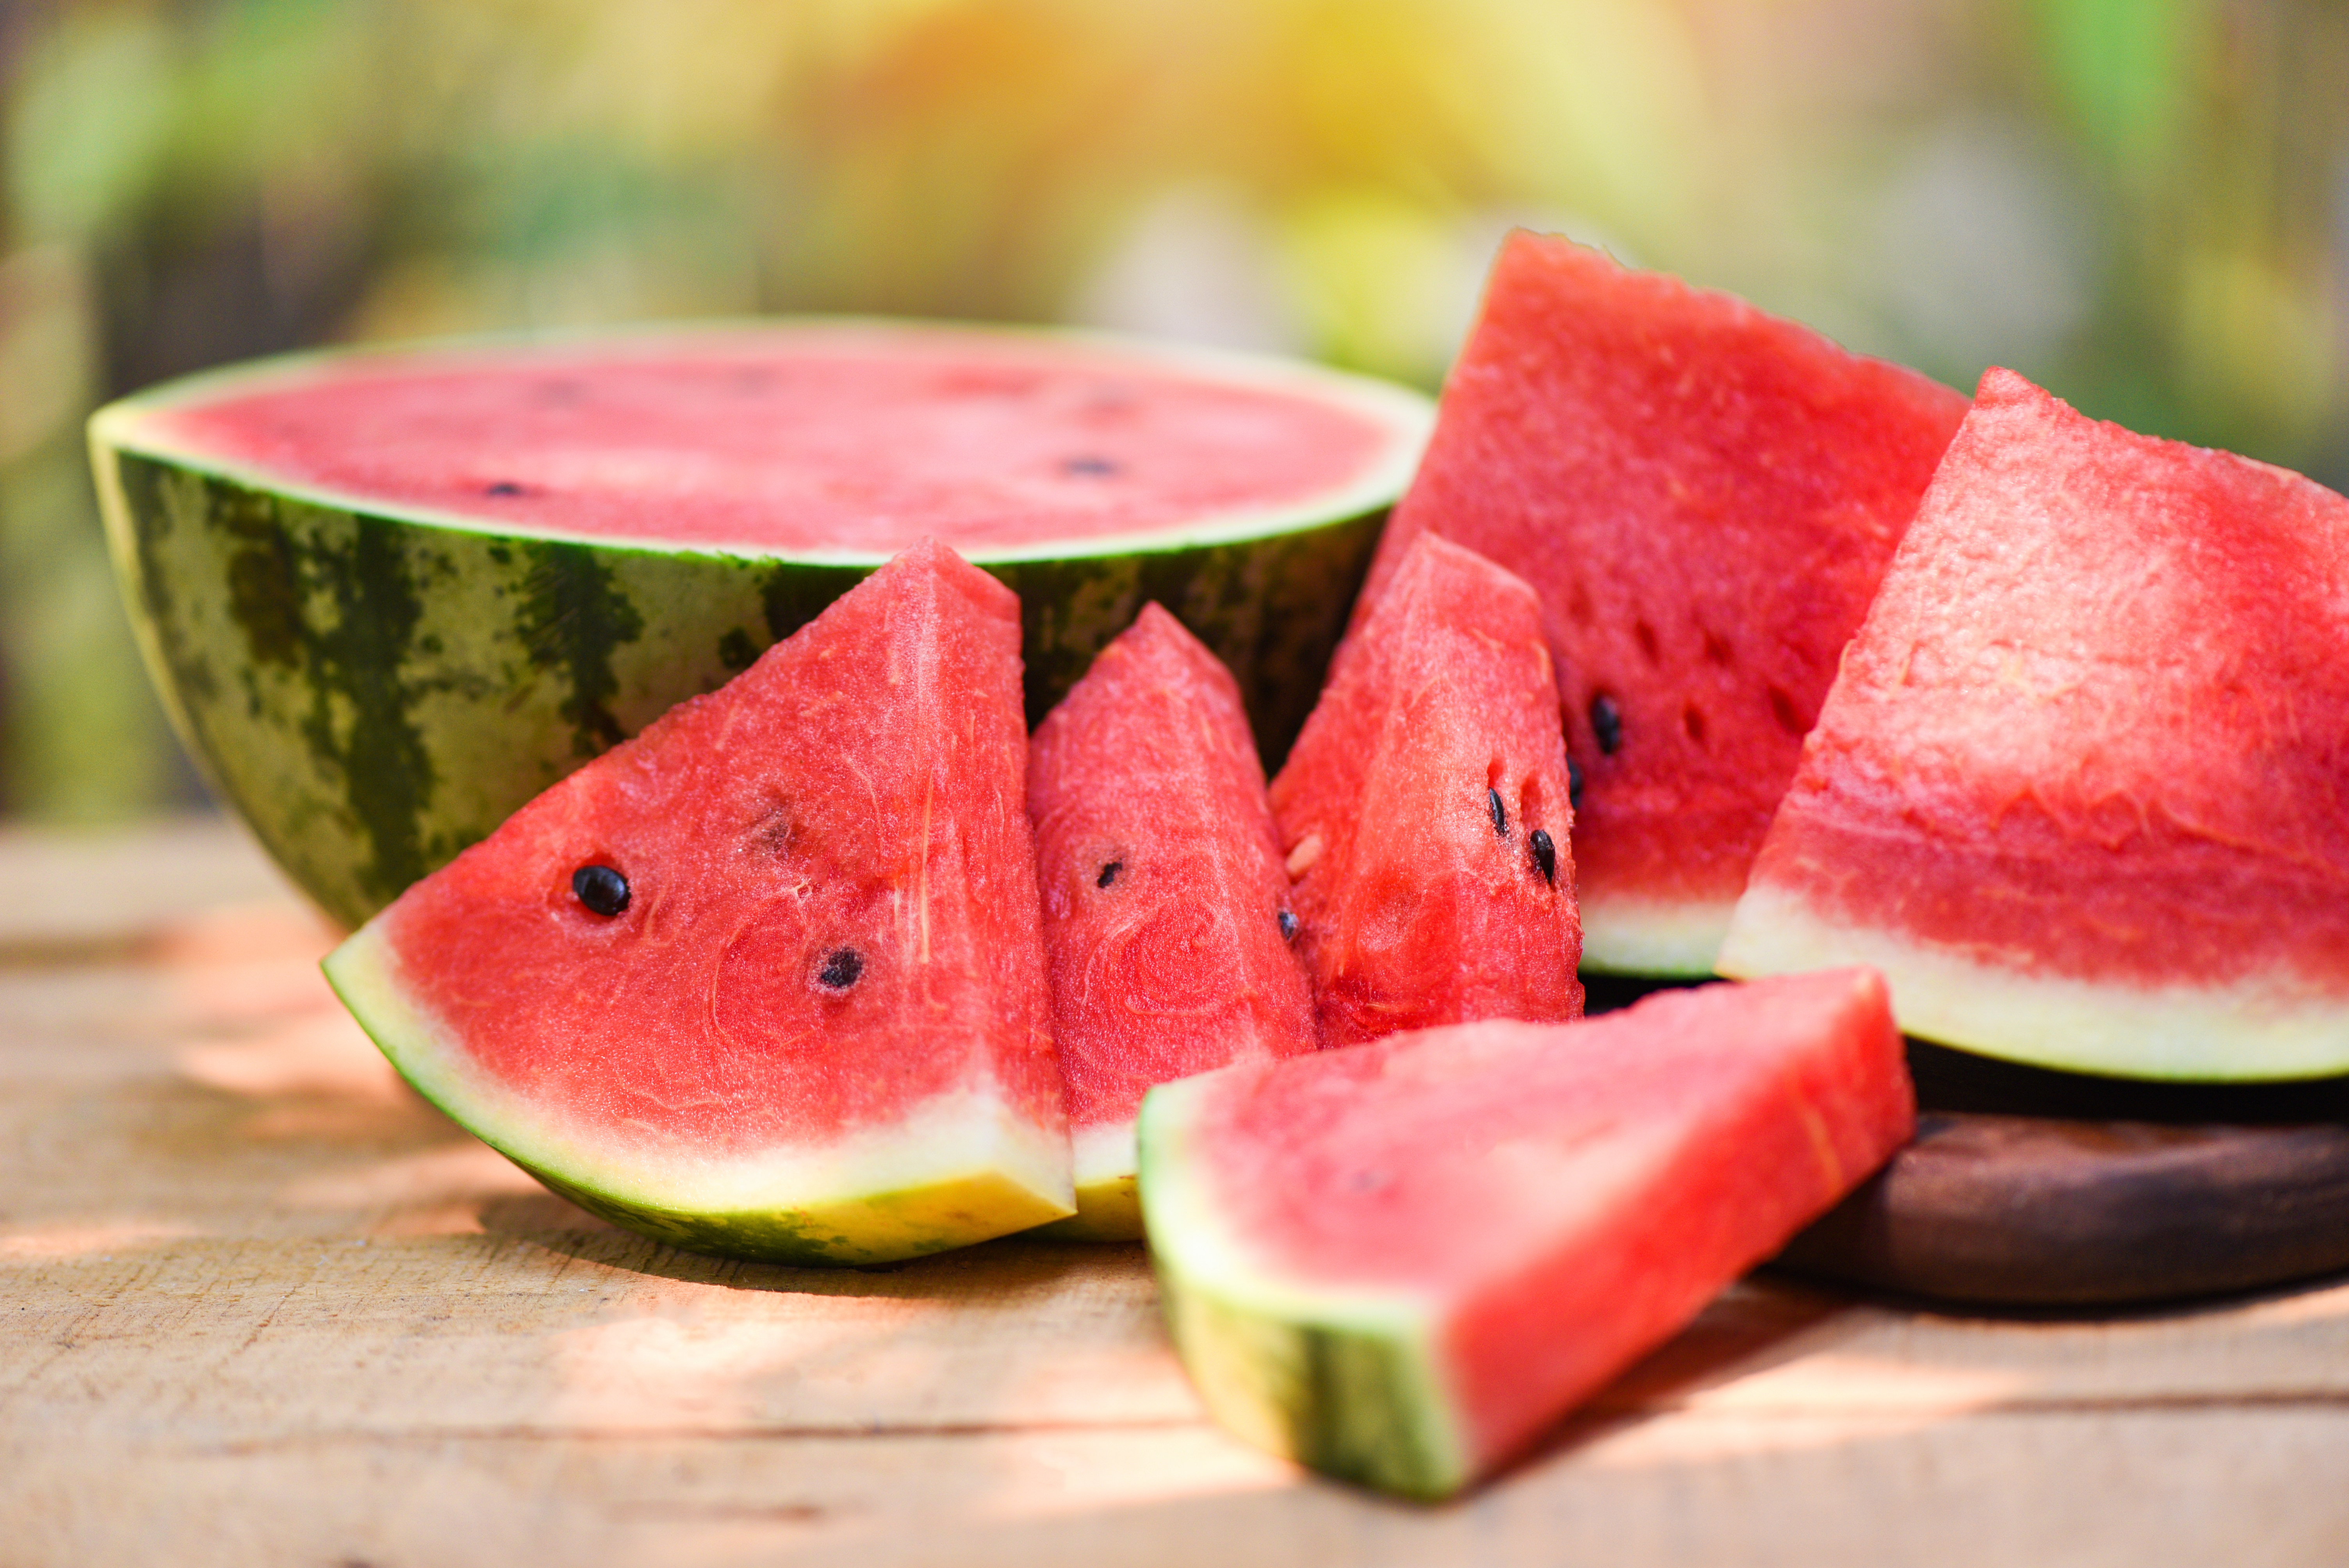 sliced-watermelon-wooden-nature-close-up-fresh-watermelon-pieces-tropical-summer-fruit